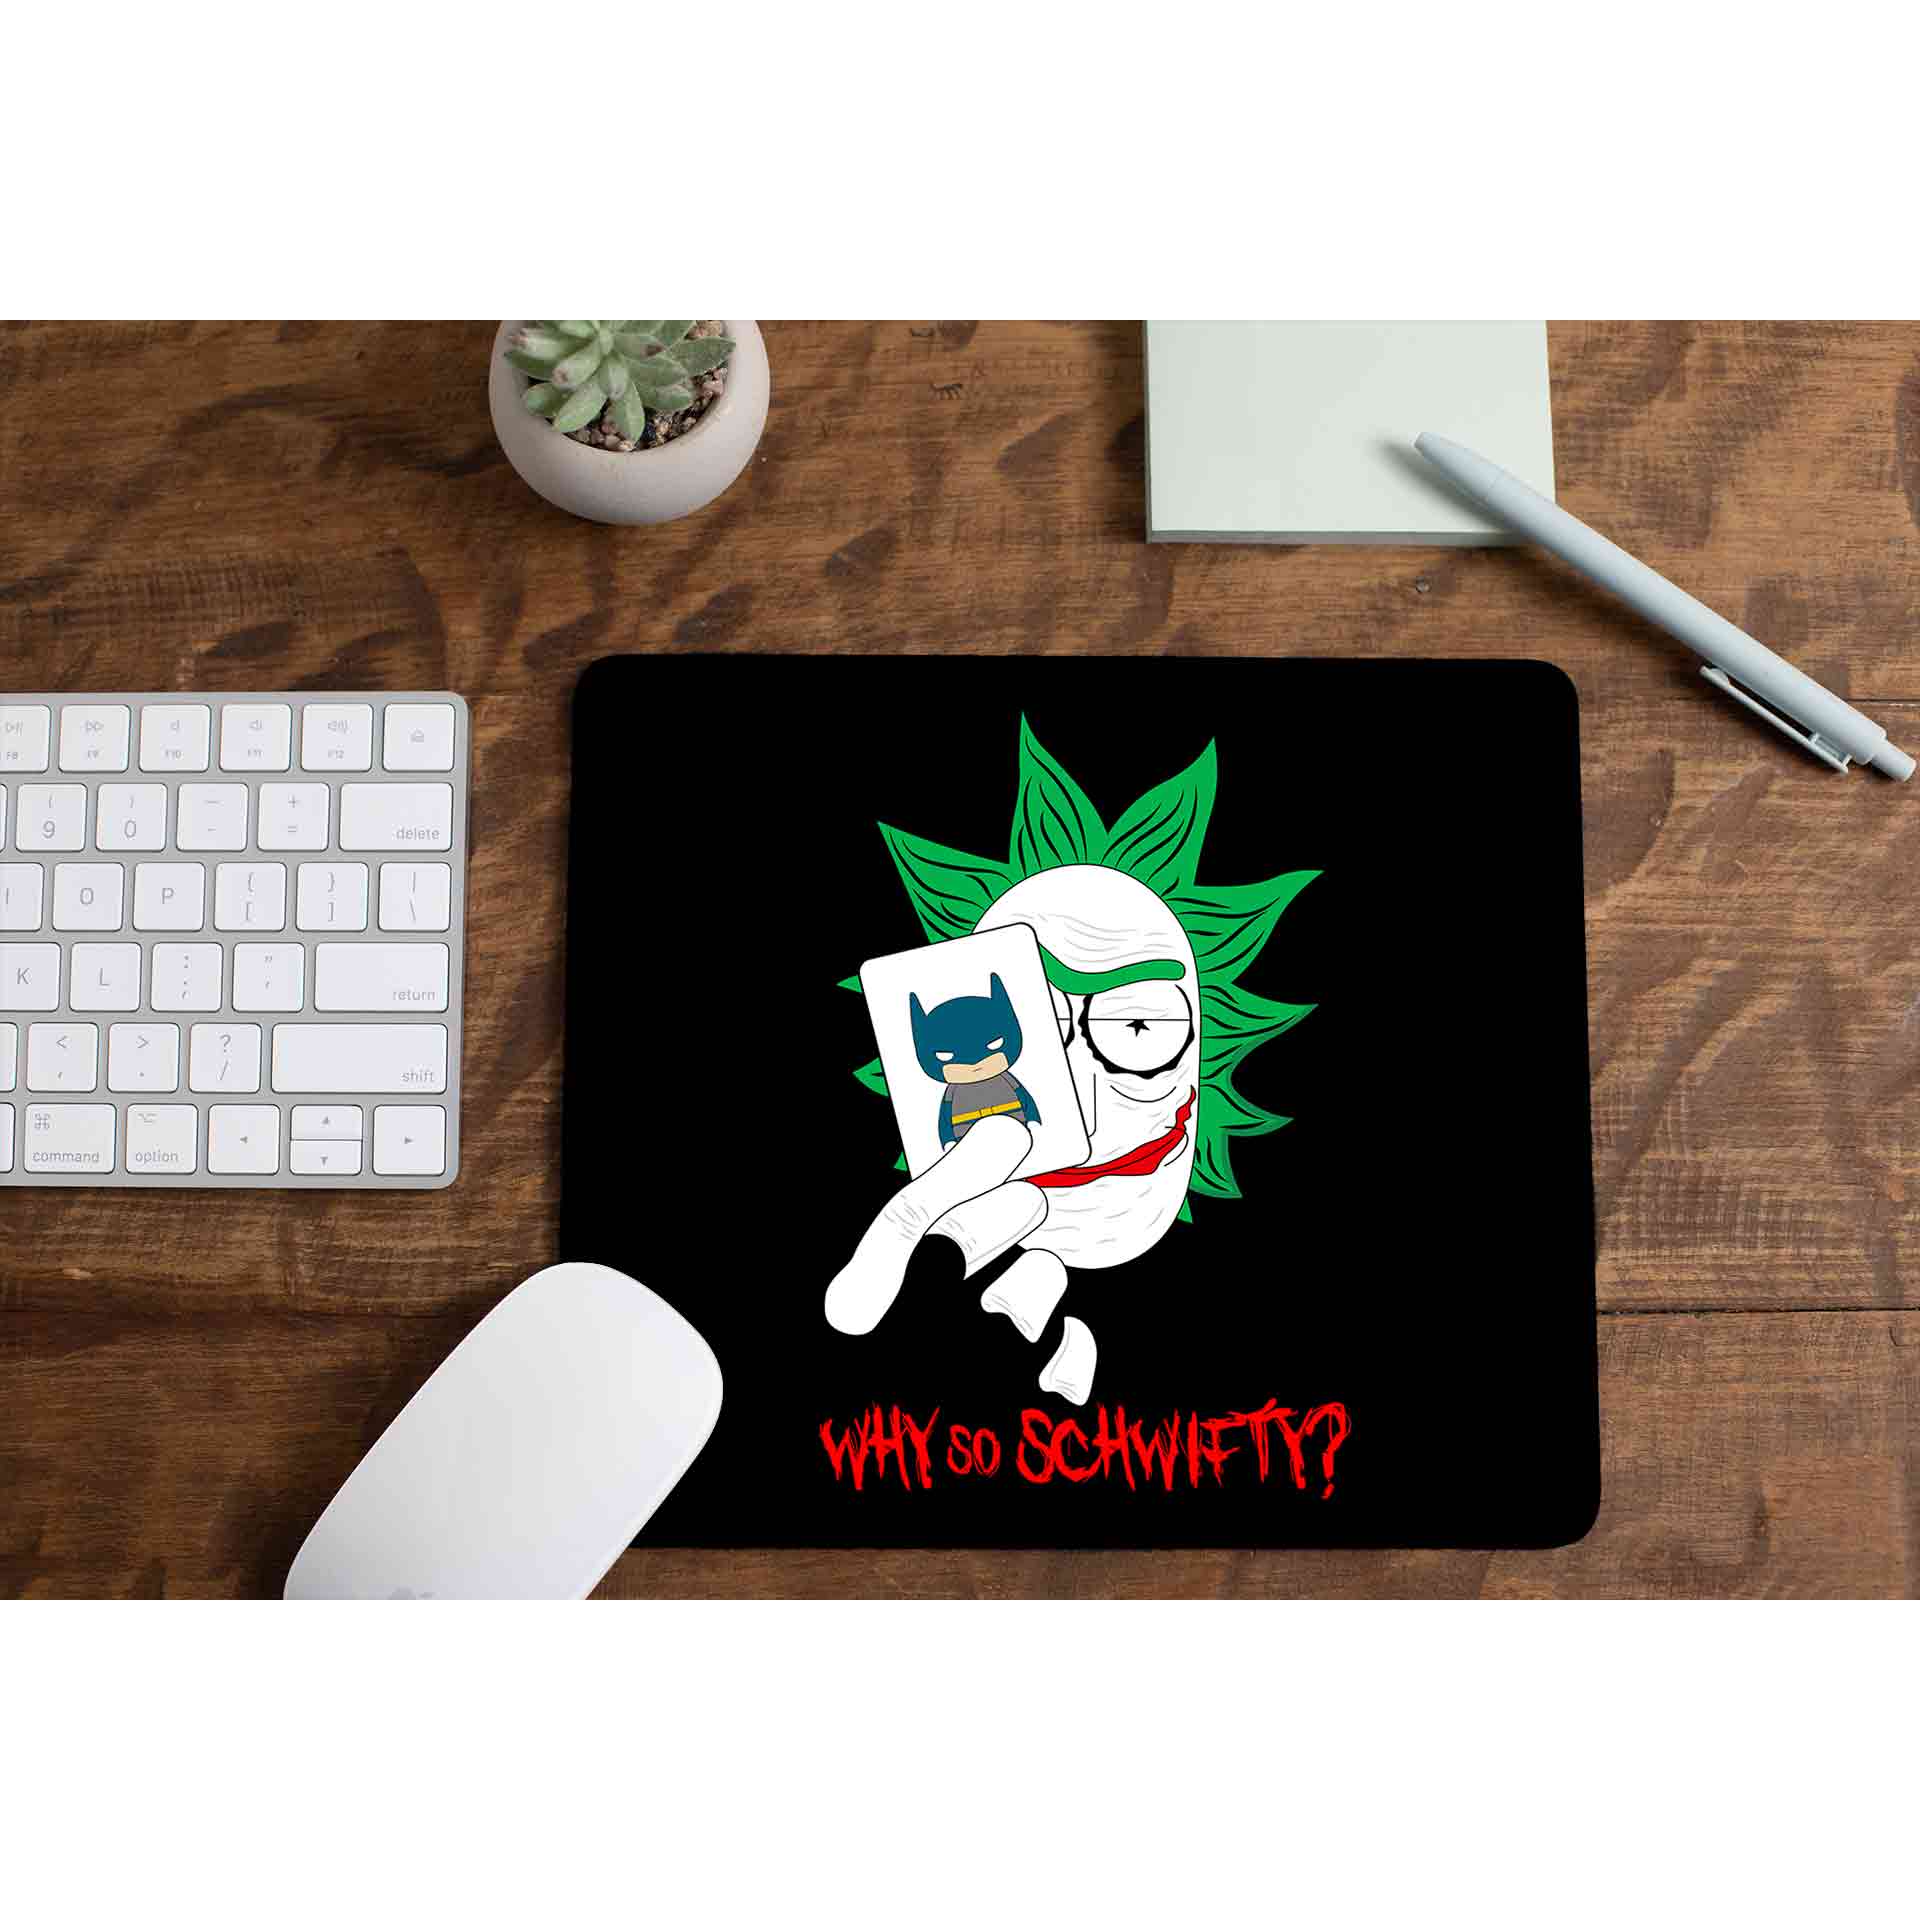 rick and morty joker mousepad logitech large anime buy online india the banyan tee tbt men women girls boys unisex  rick and morty online summer beth mr meeseeks jerry quote vector art clothing accessories merchandise